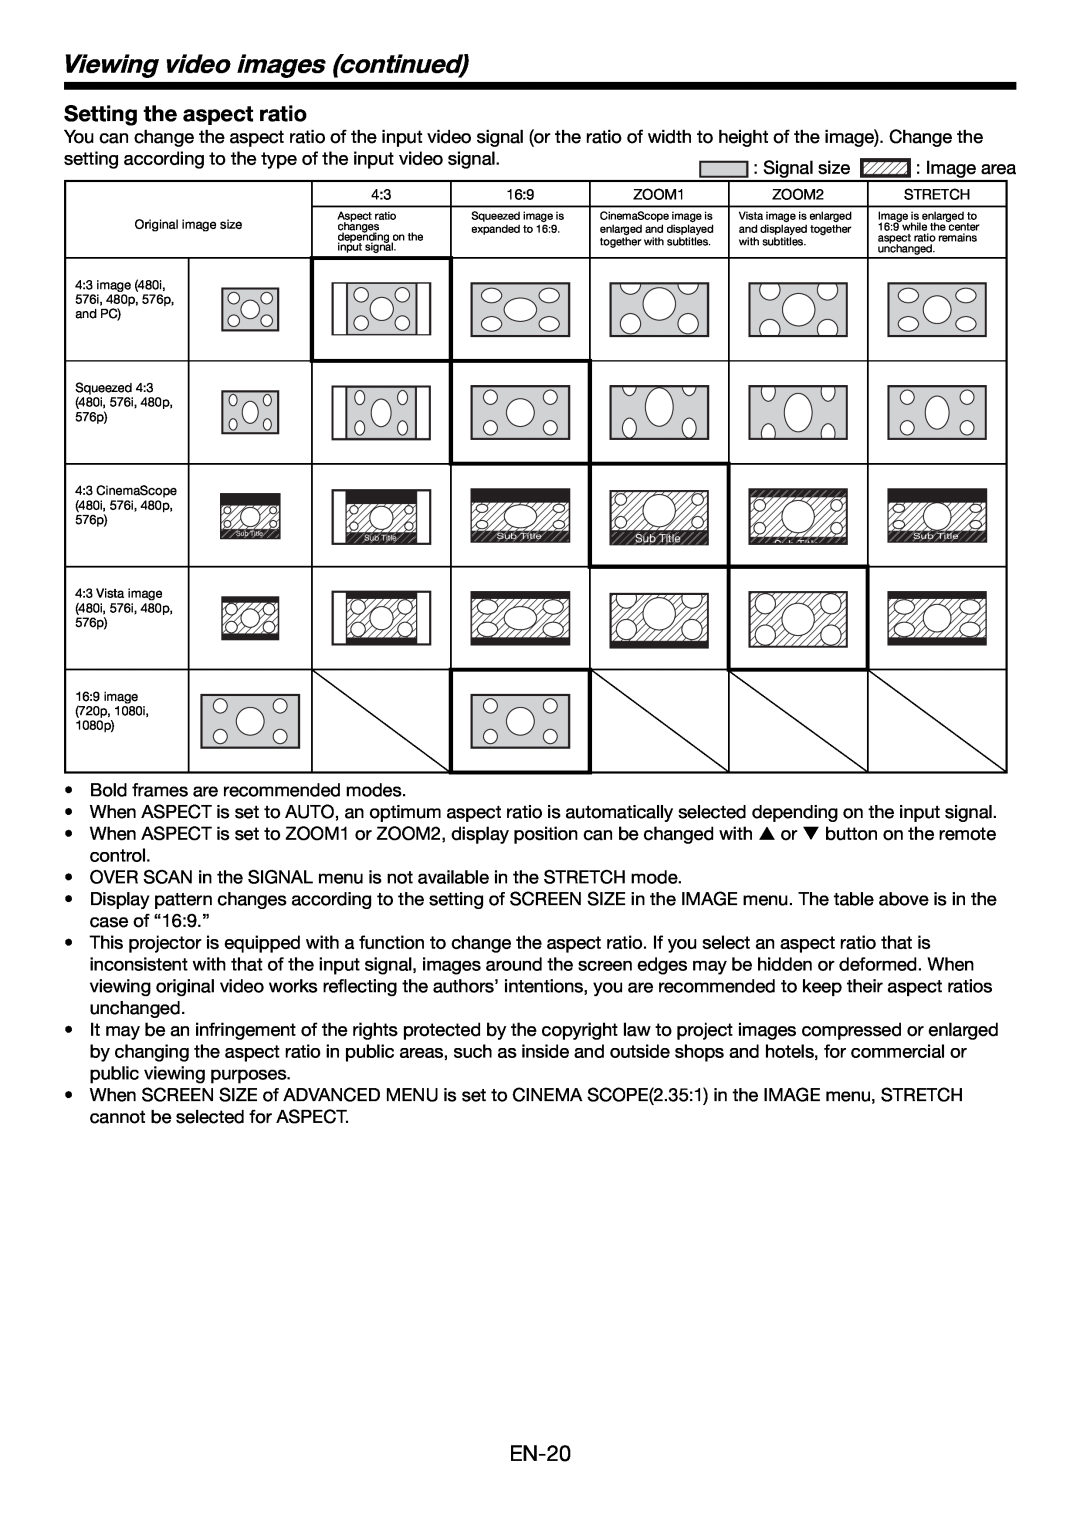 Mitsubishi Electronics HC6000 user manual Setting the aspect ratio, Viewing video images continued, EN-20 